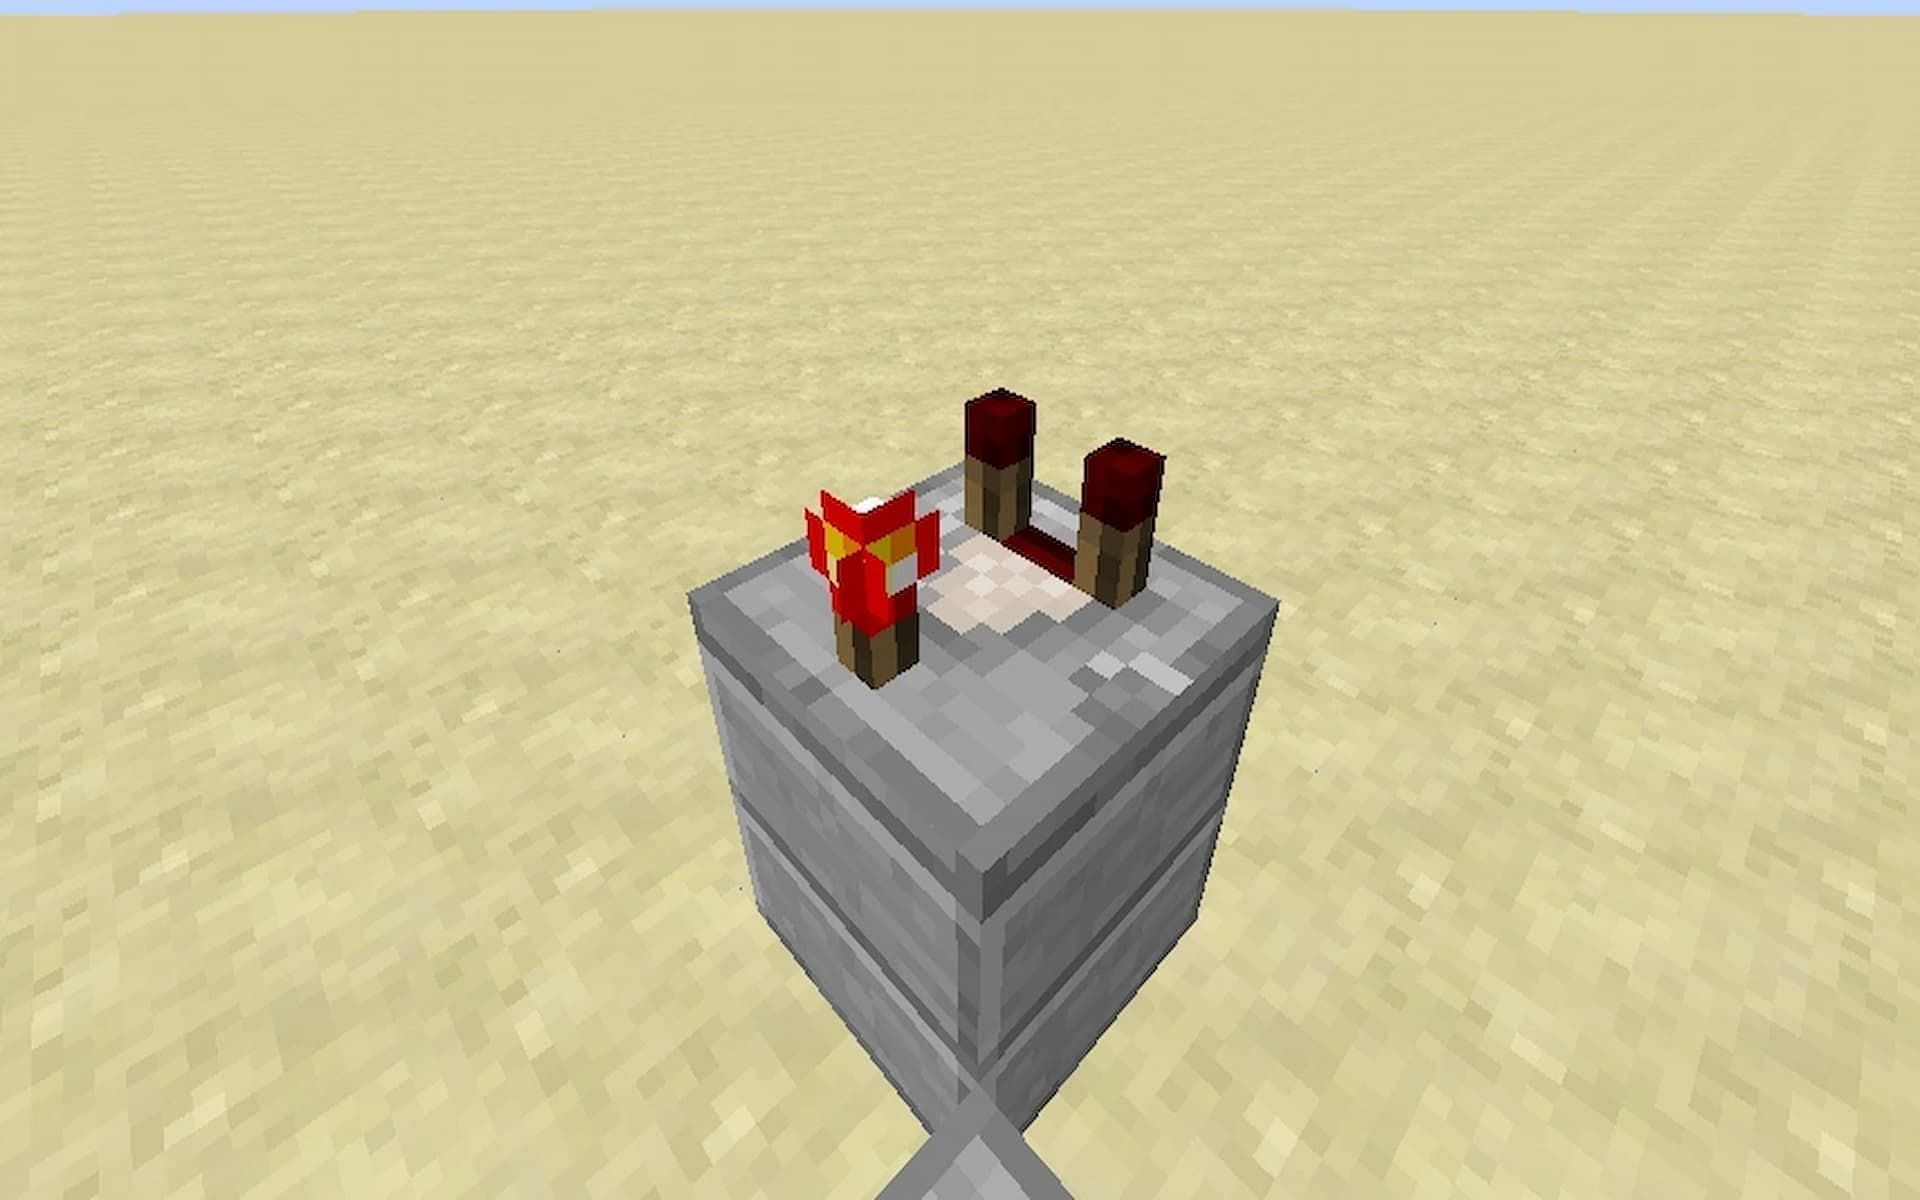 Redstone comparators have many functions in Minecraft (Image via www.minecraft.fandom.com)